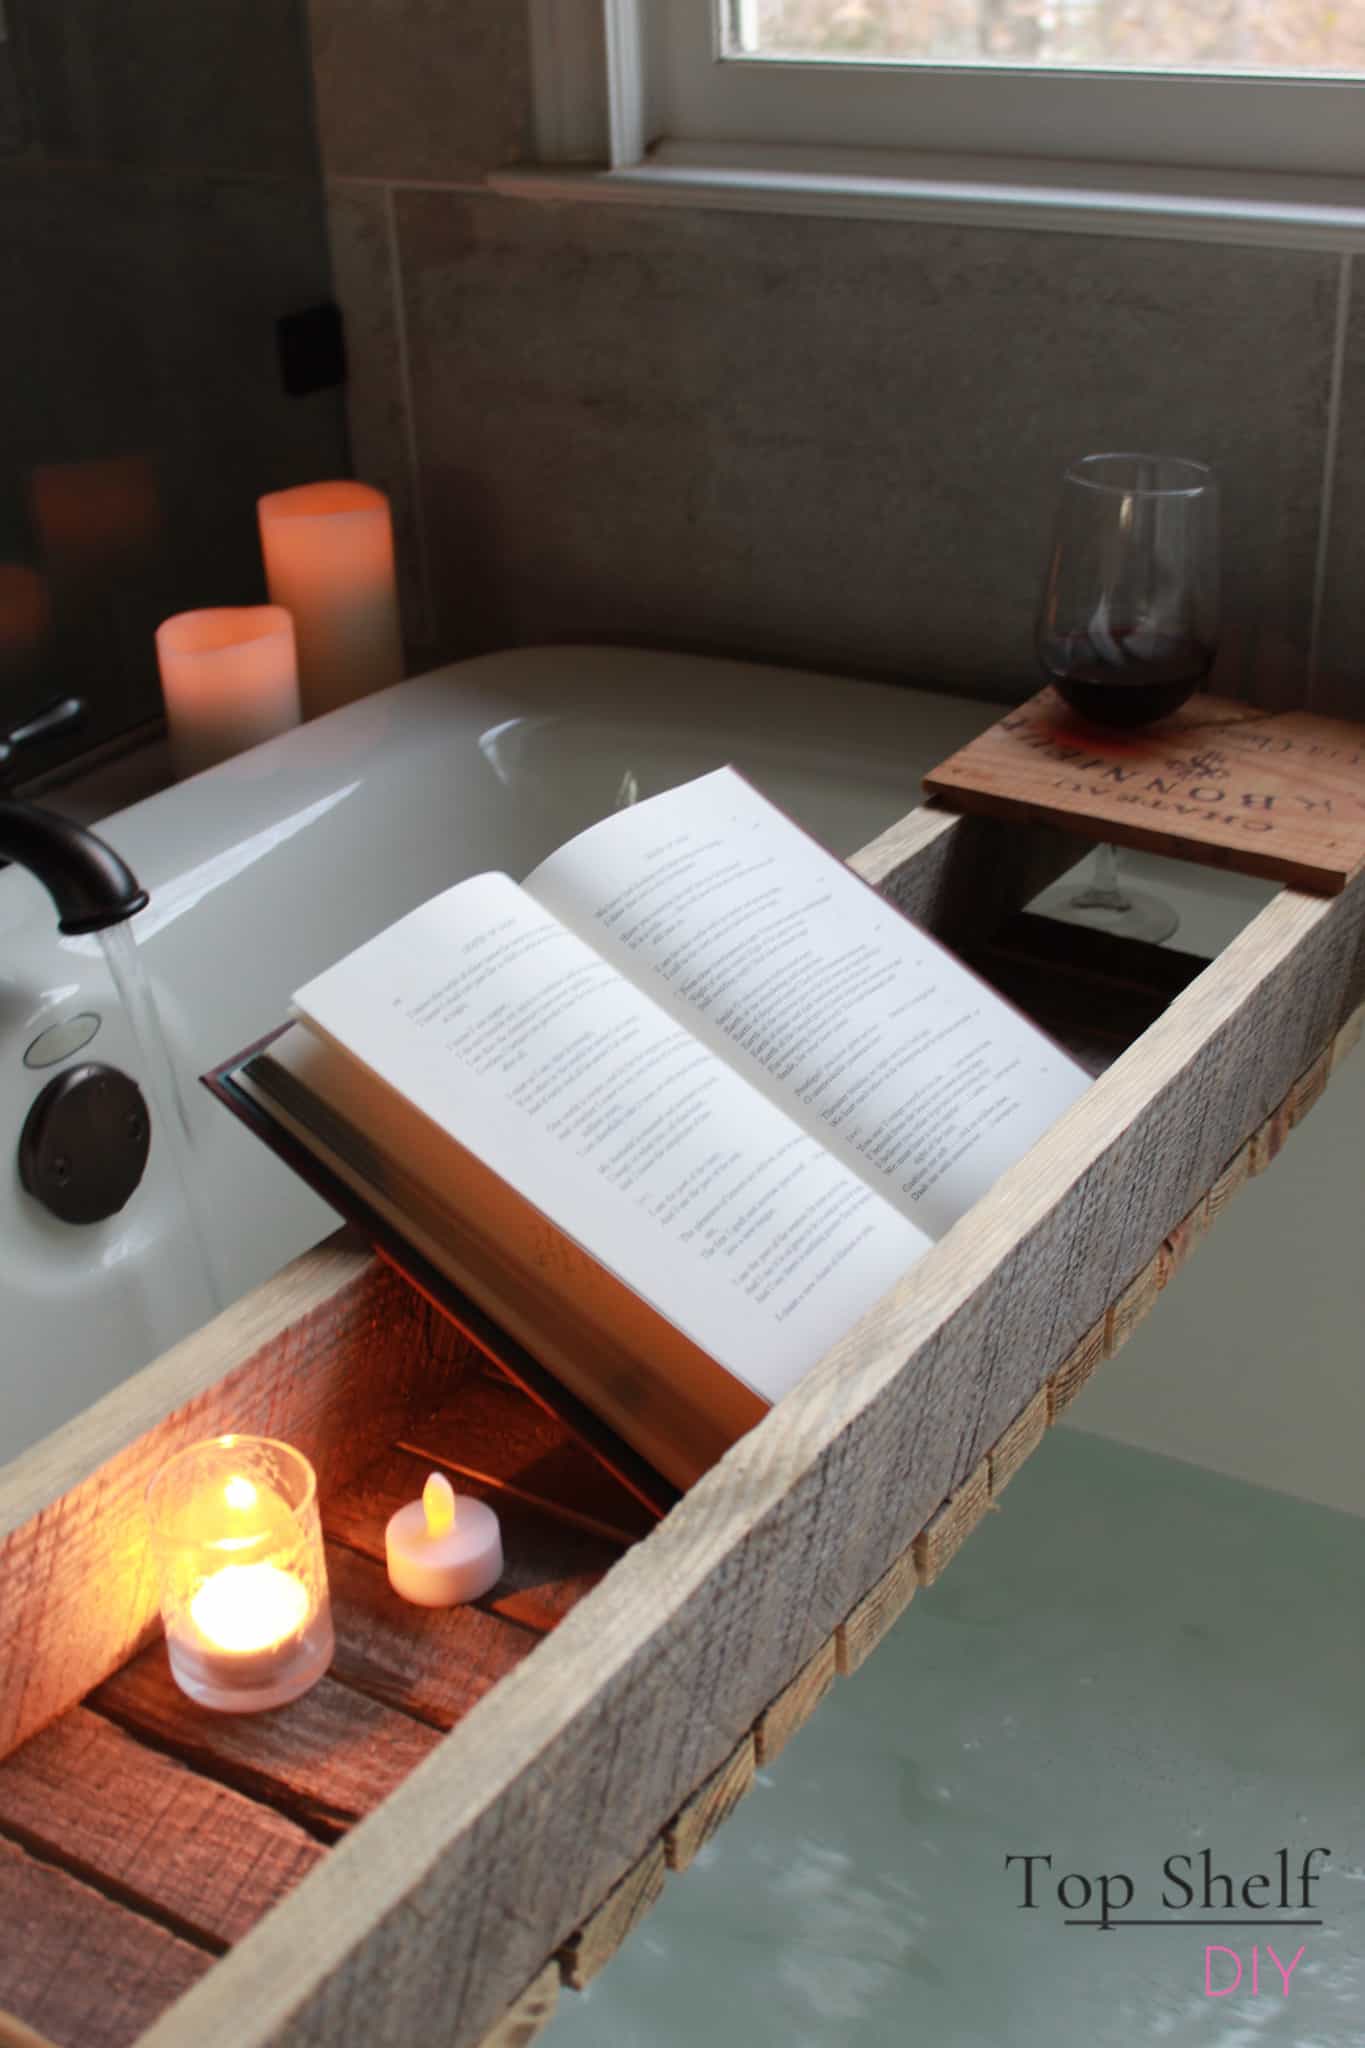 Take your nighttime relaxation up a notch with this DIY bathtub shelf